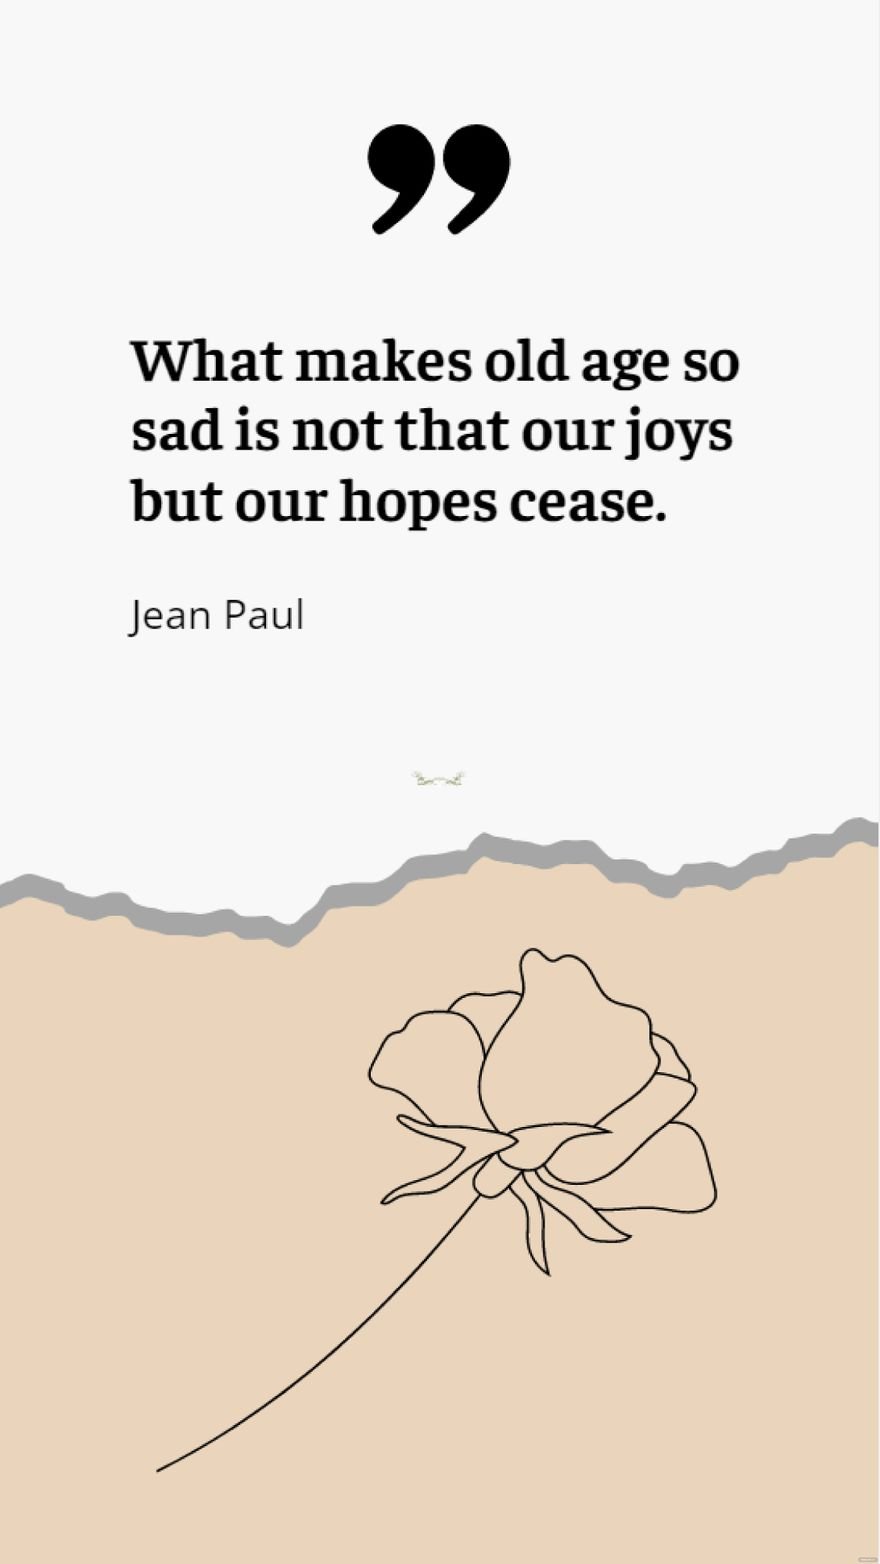 Jean Paul - What makes old age so sad is not that our joys but our hopes cease.